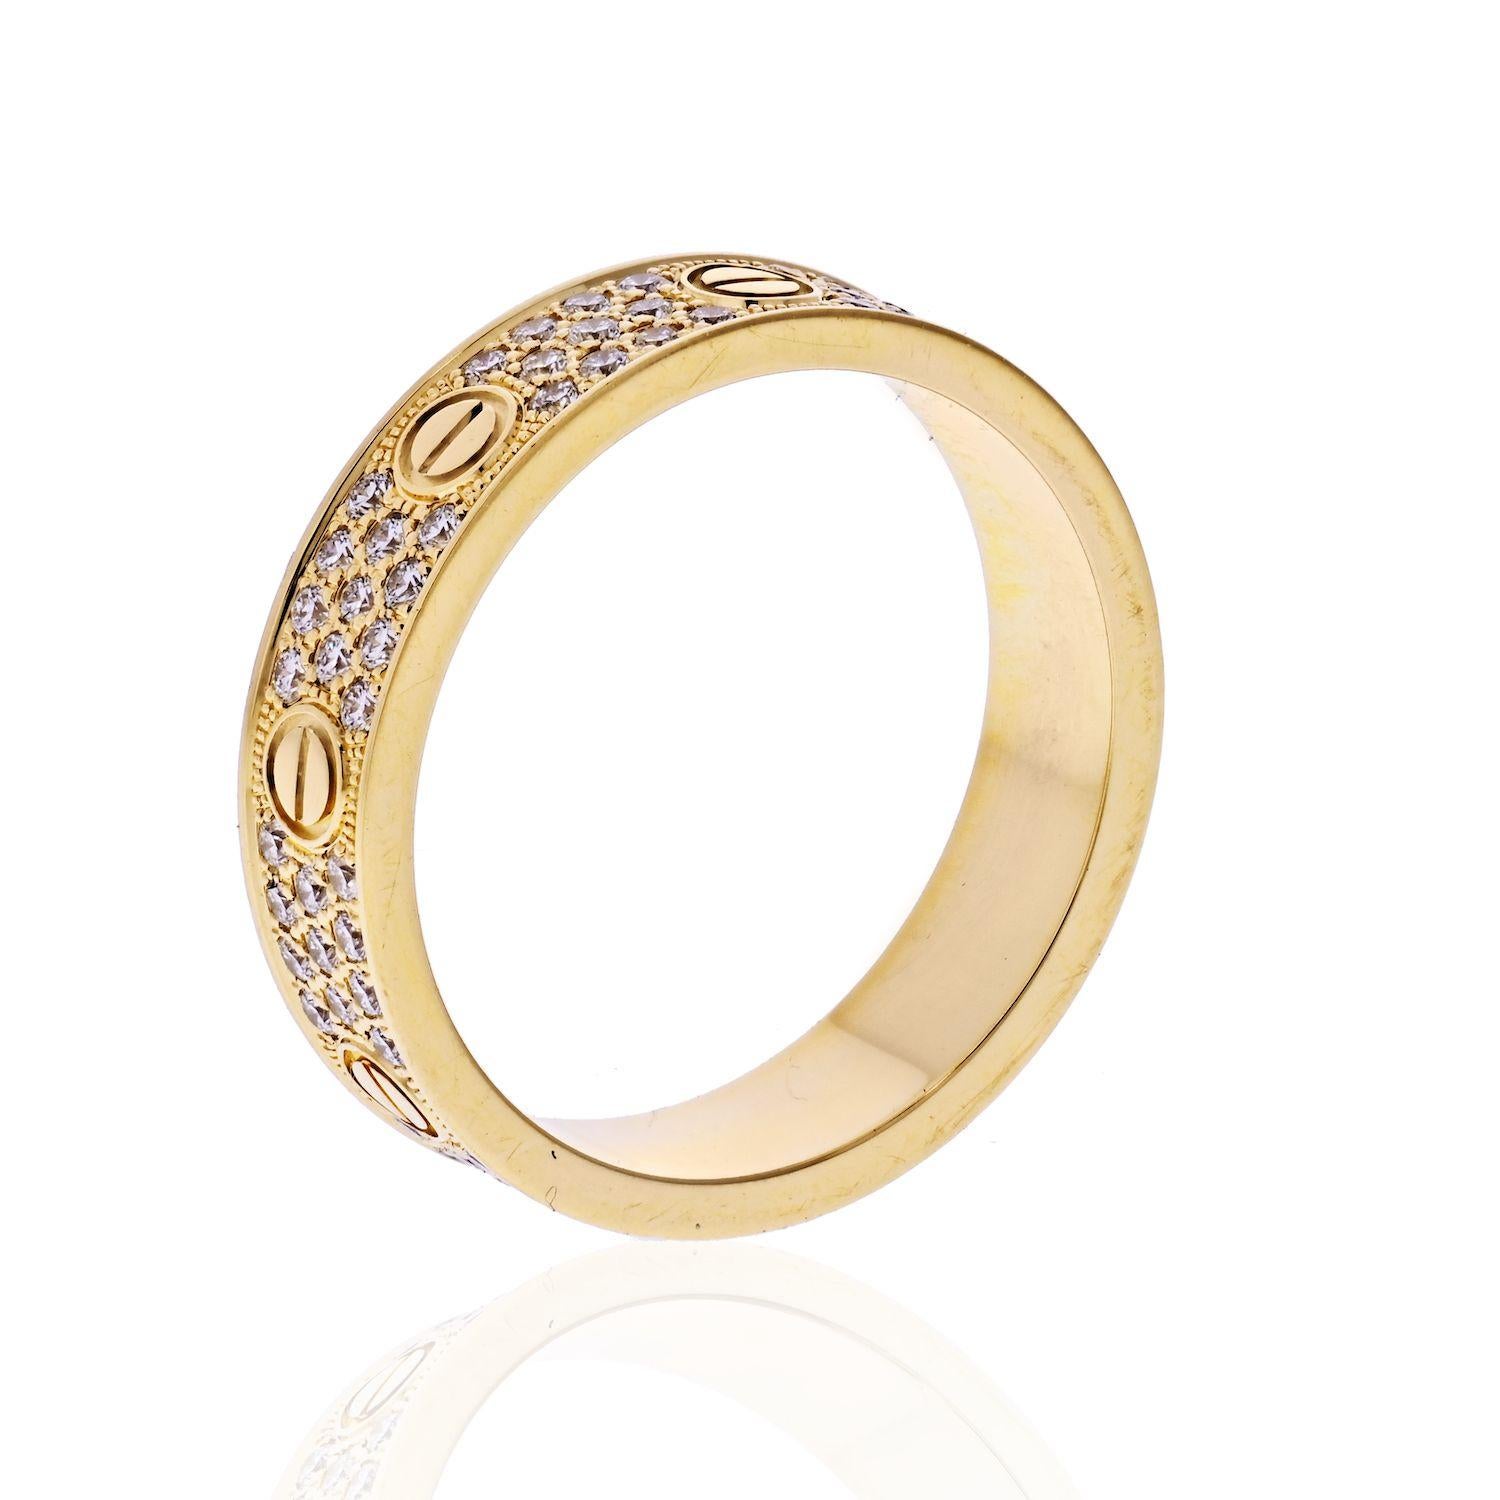 Cartier 18K Yellow Gold Love Pave Diamond Ring
Size 53 
Width: 4.7mm
Service papers.